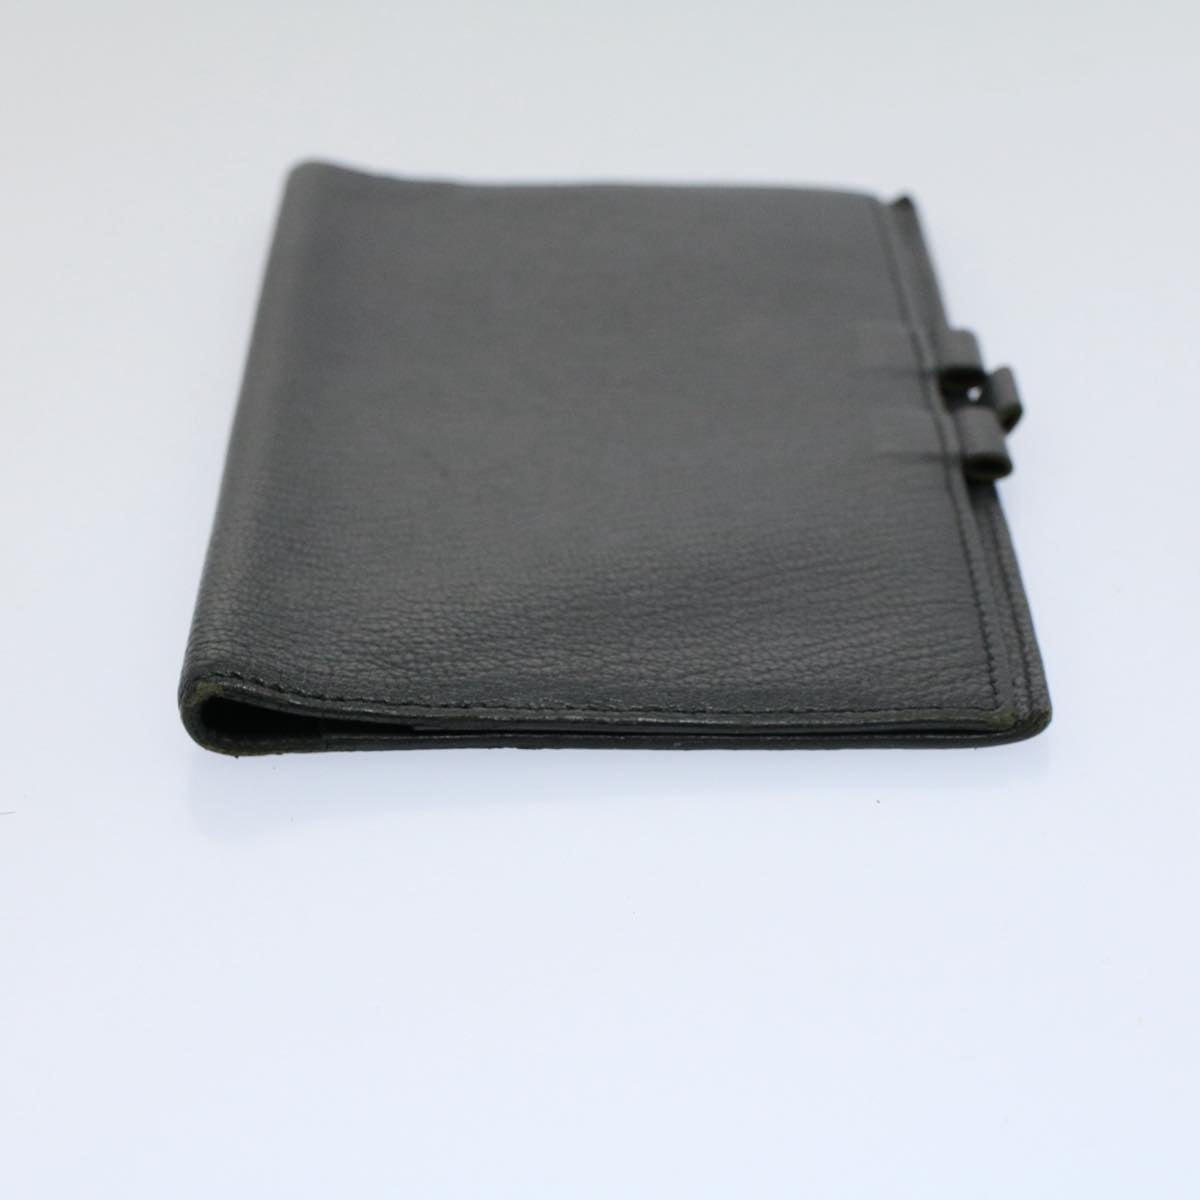 HERMES Agenda Day Planner Cover Leather Gray Auth bs9468